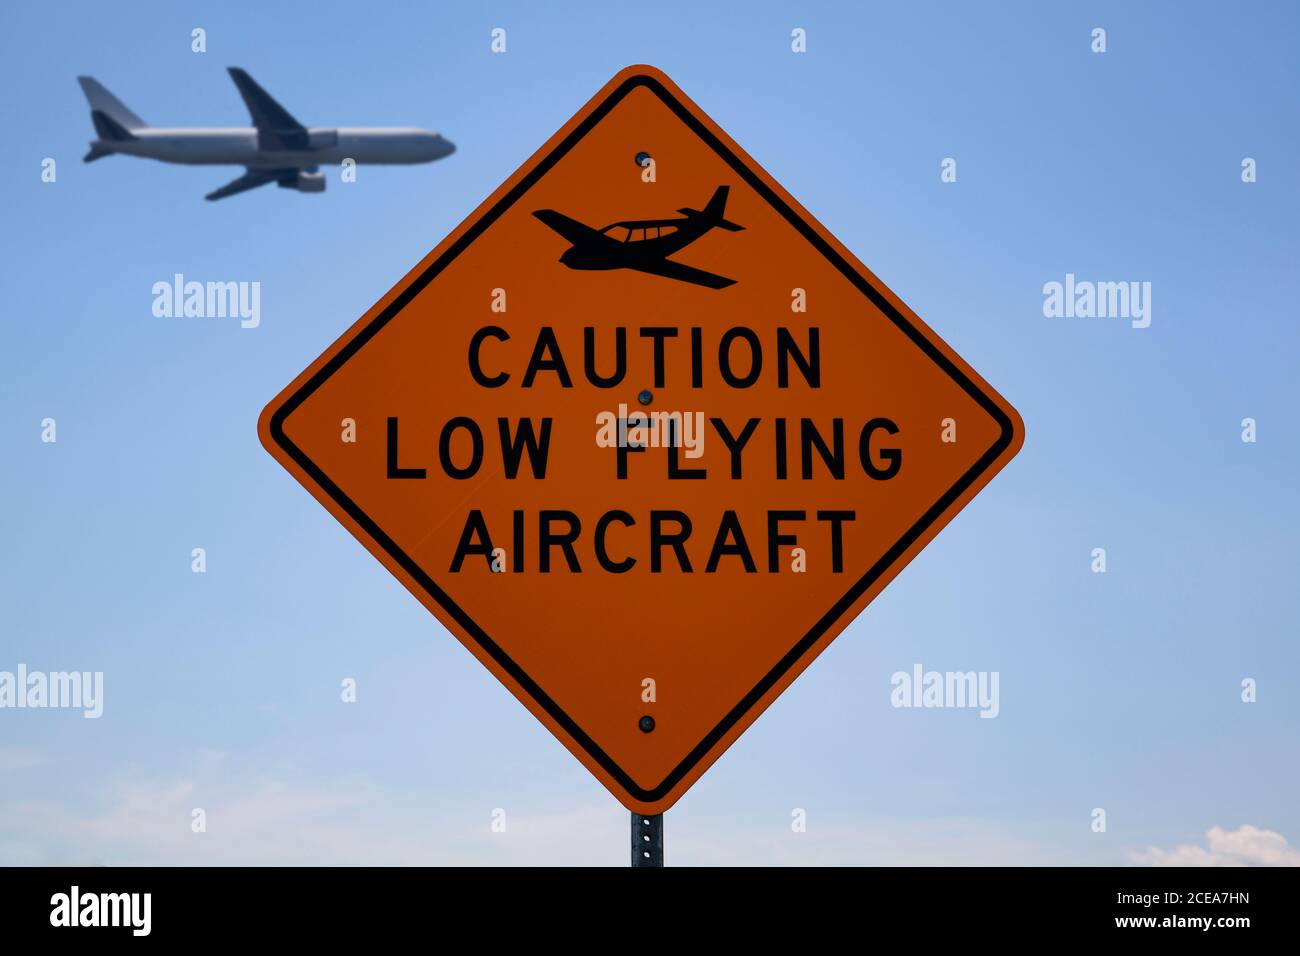 Stensville, MD 08/18/2020: Road sign near a local airfield which says 'Caution low flying aircraft' with a plane logo. A blurred passenger airplane is Stock Photo